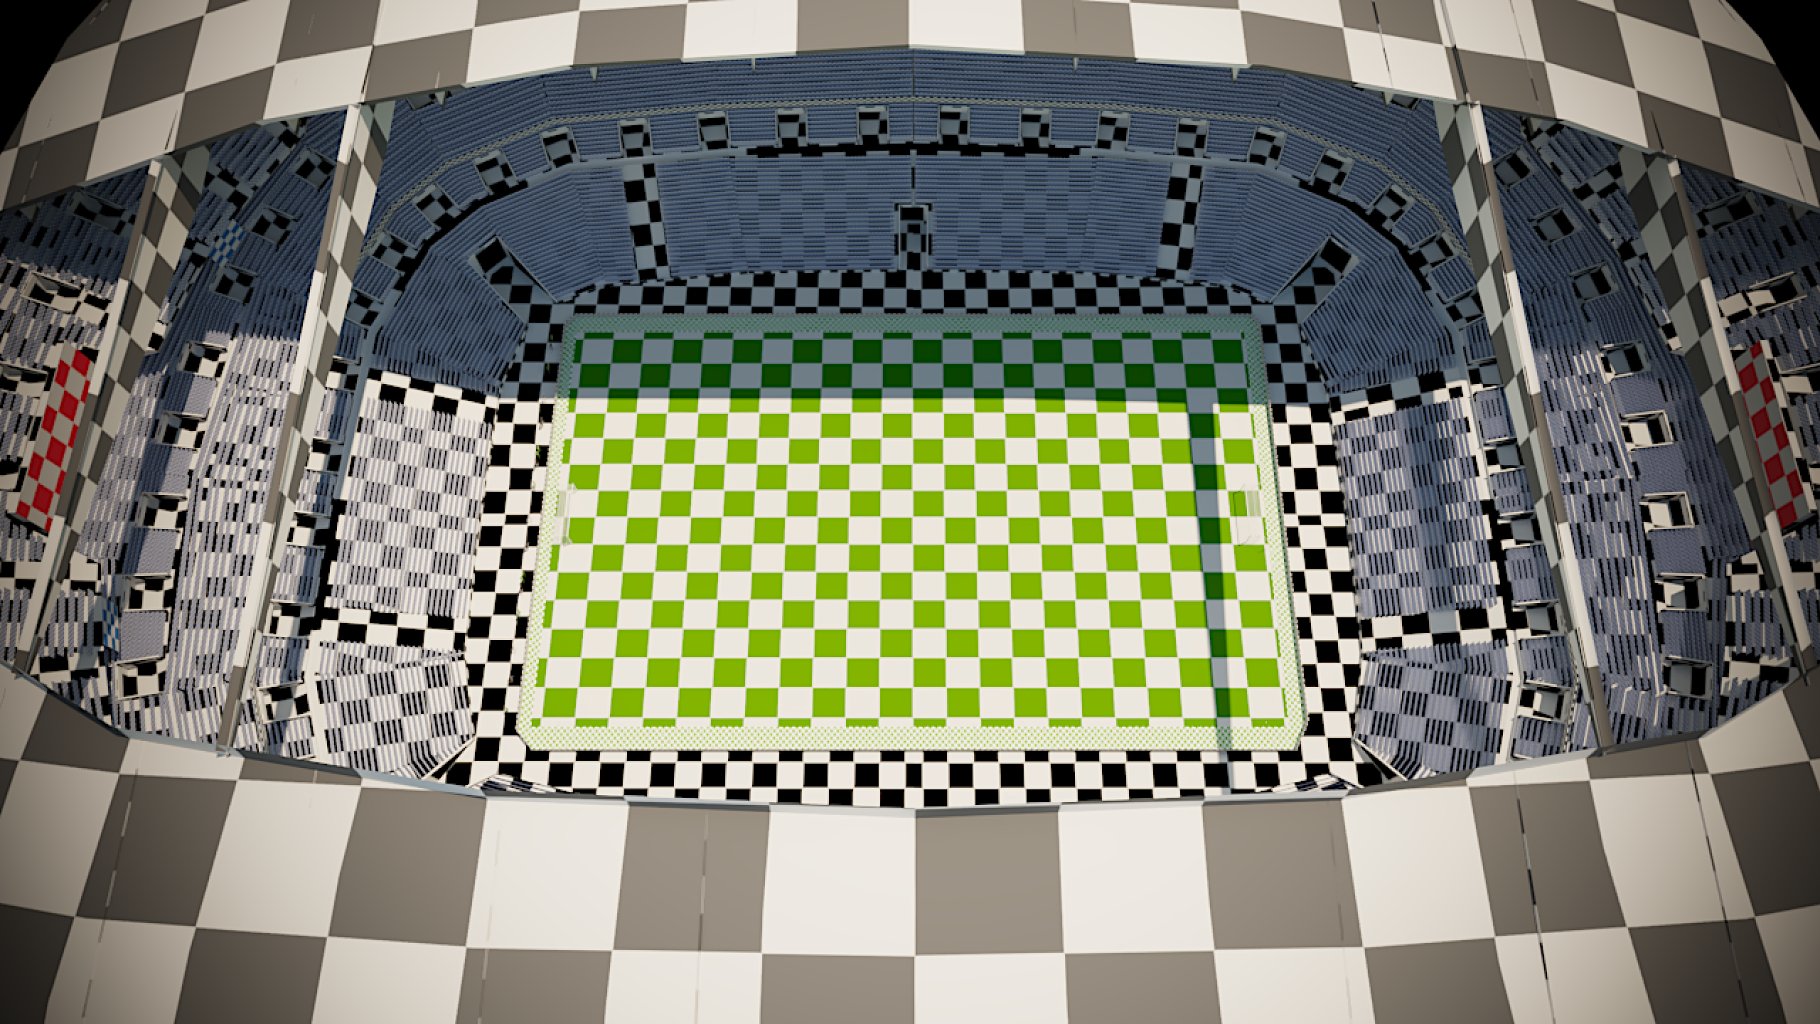 Chess elements with a football field.